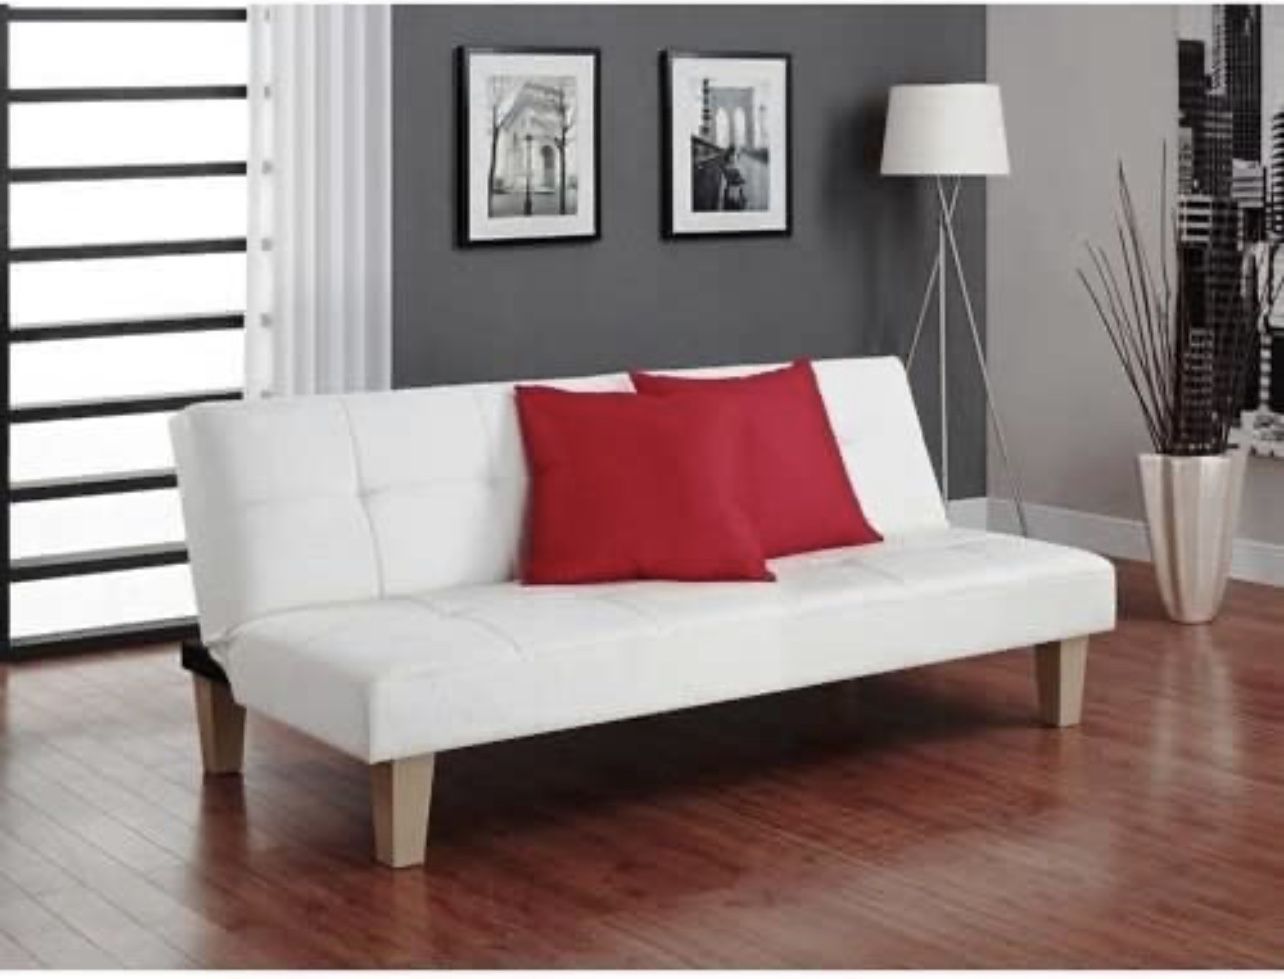 Futon Couch, Tufted Faux Leather Upholstery - White